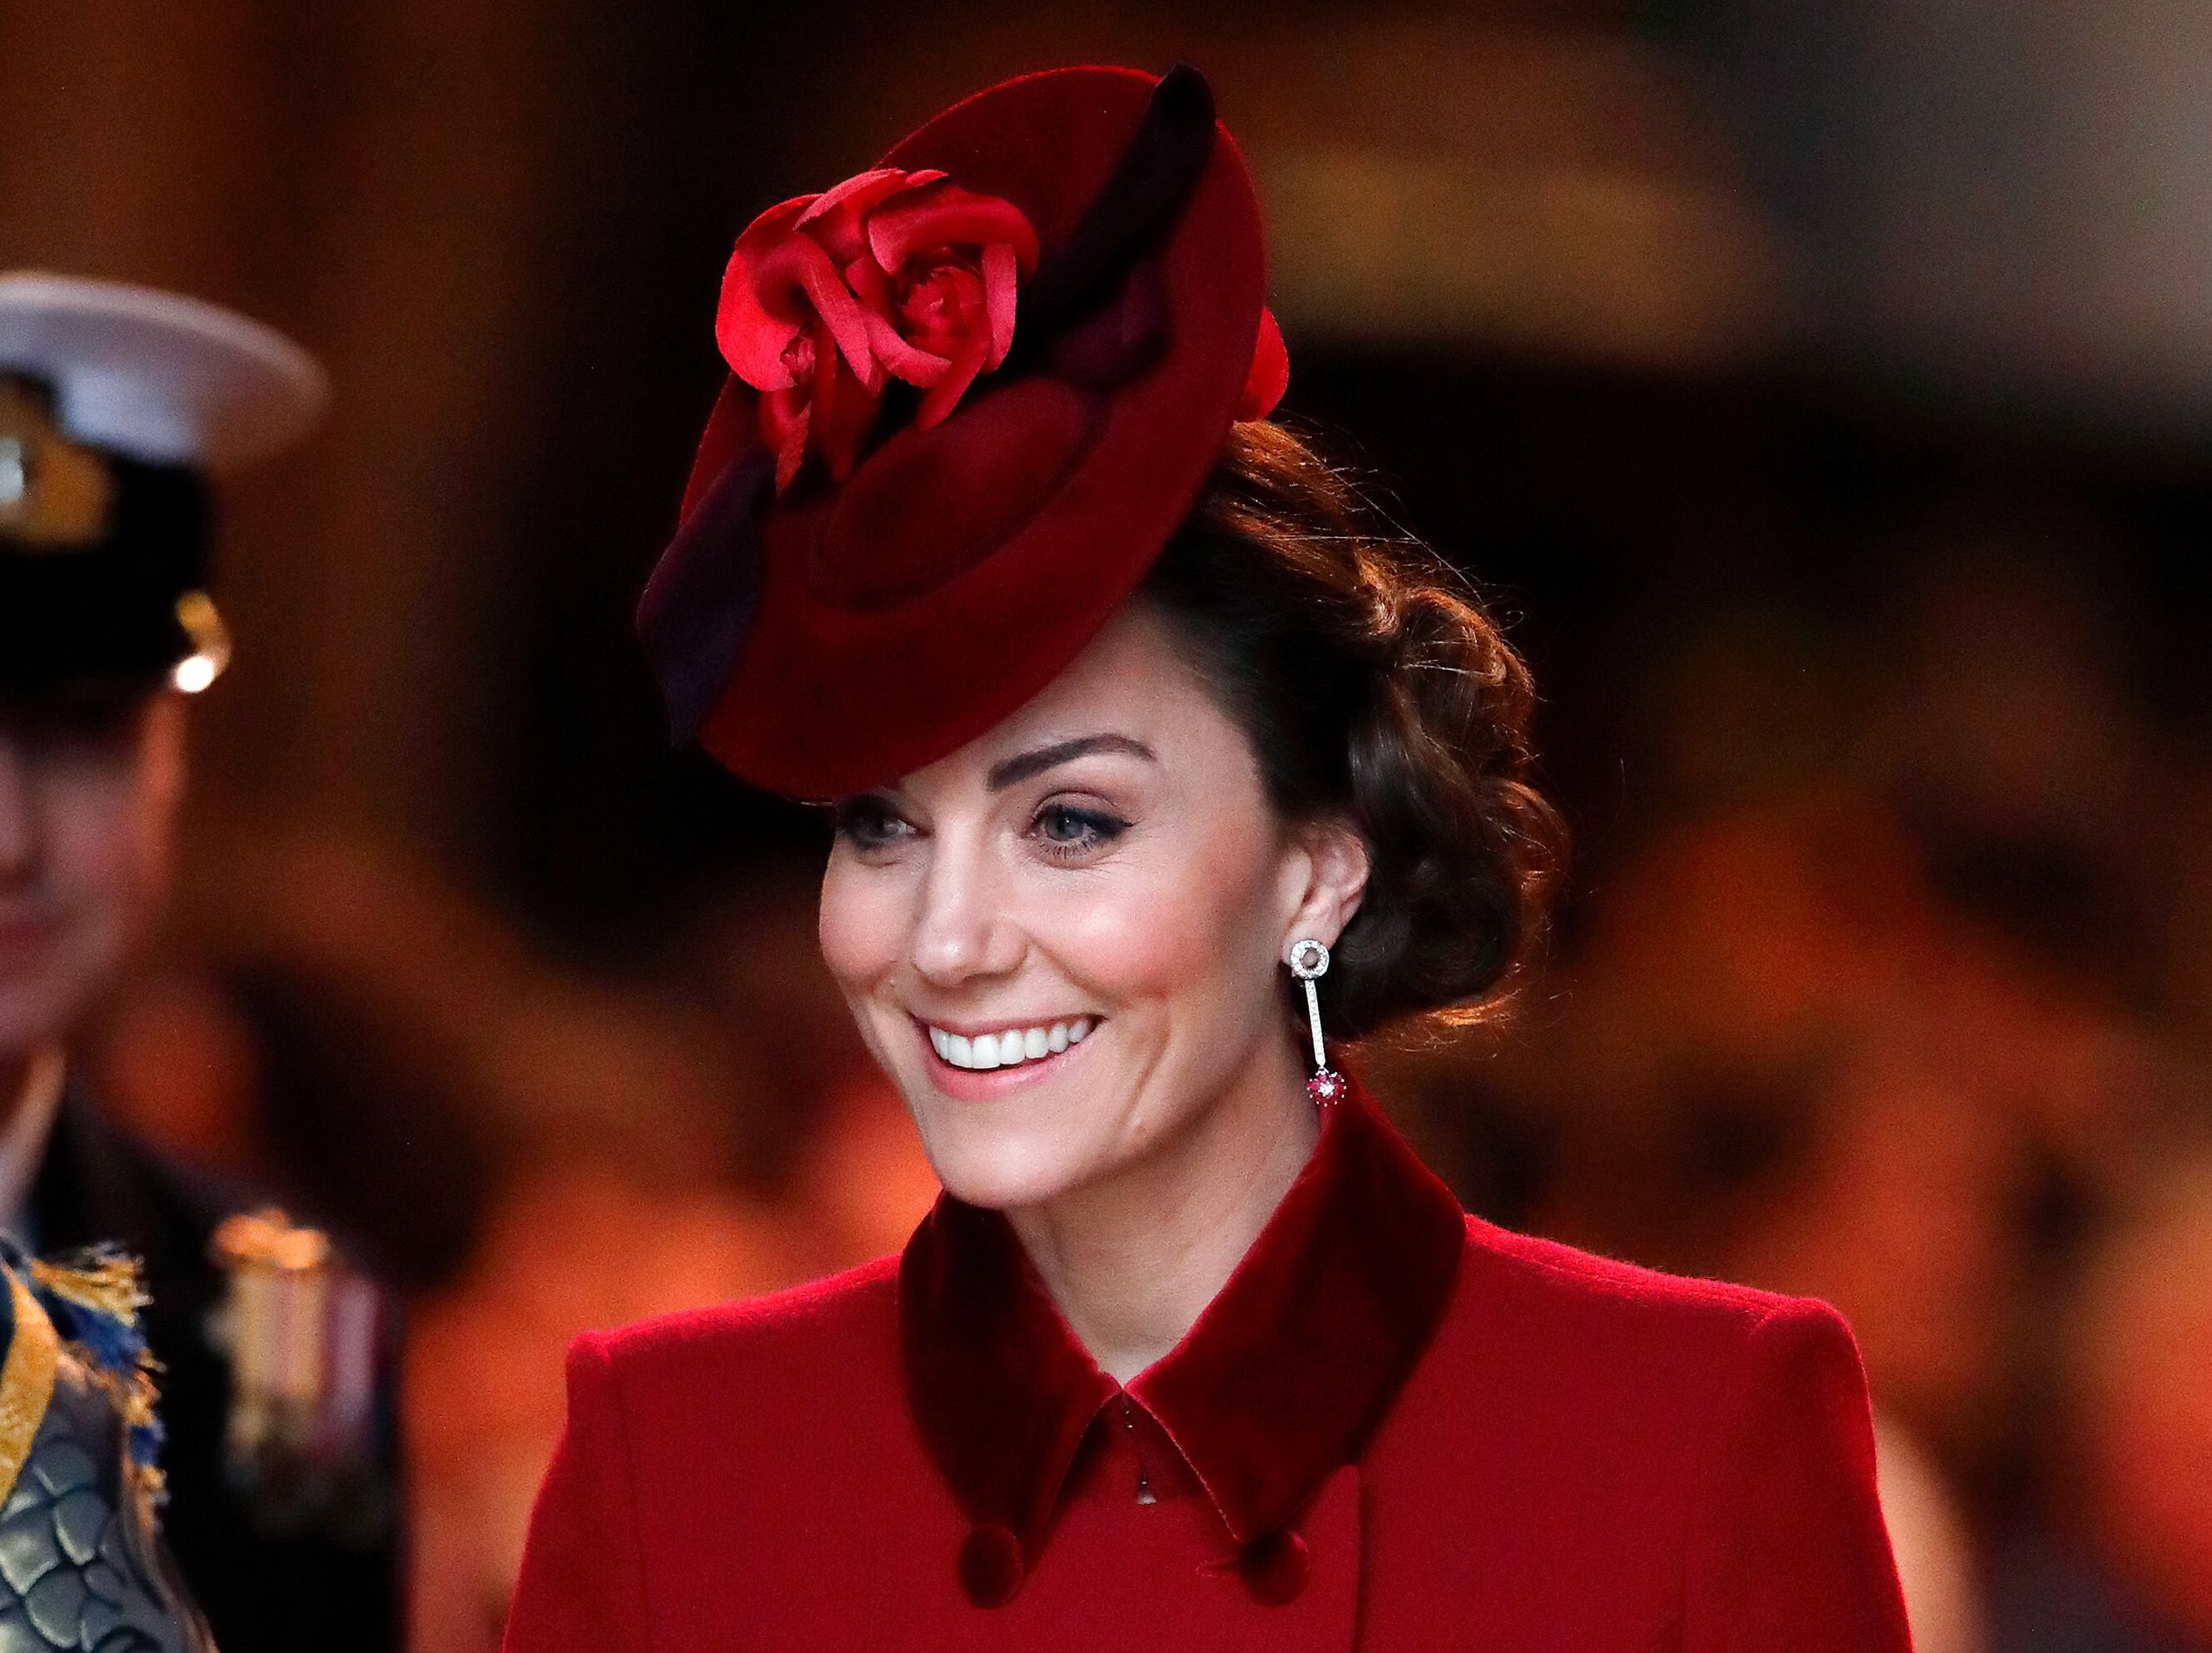 Kate Middleton participe au Commonwealth Day Service 2020 à l'abbaye de Westminster. | Source : Getty Images